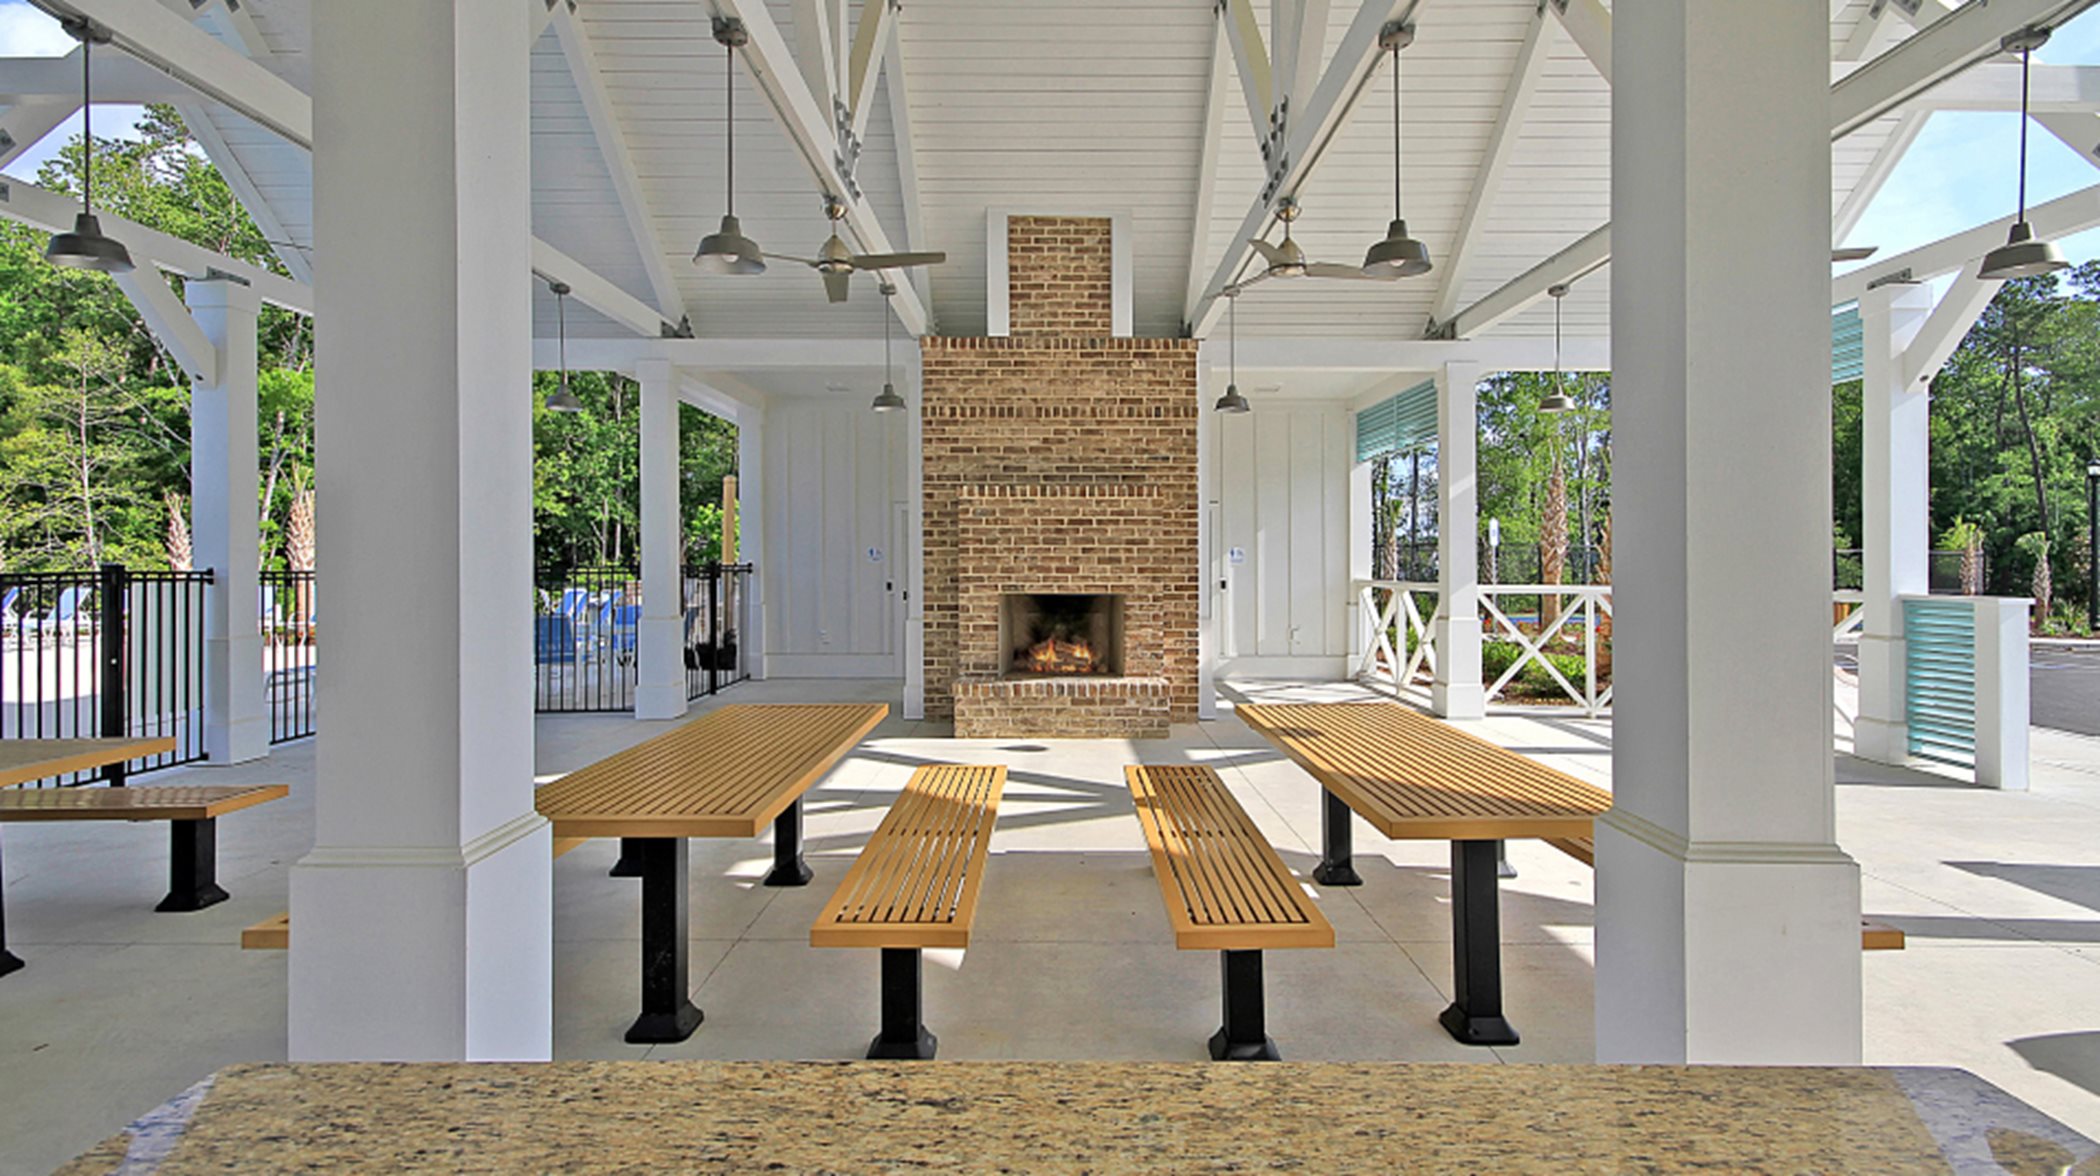 Picnic Area with Fireplace